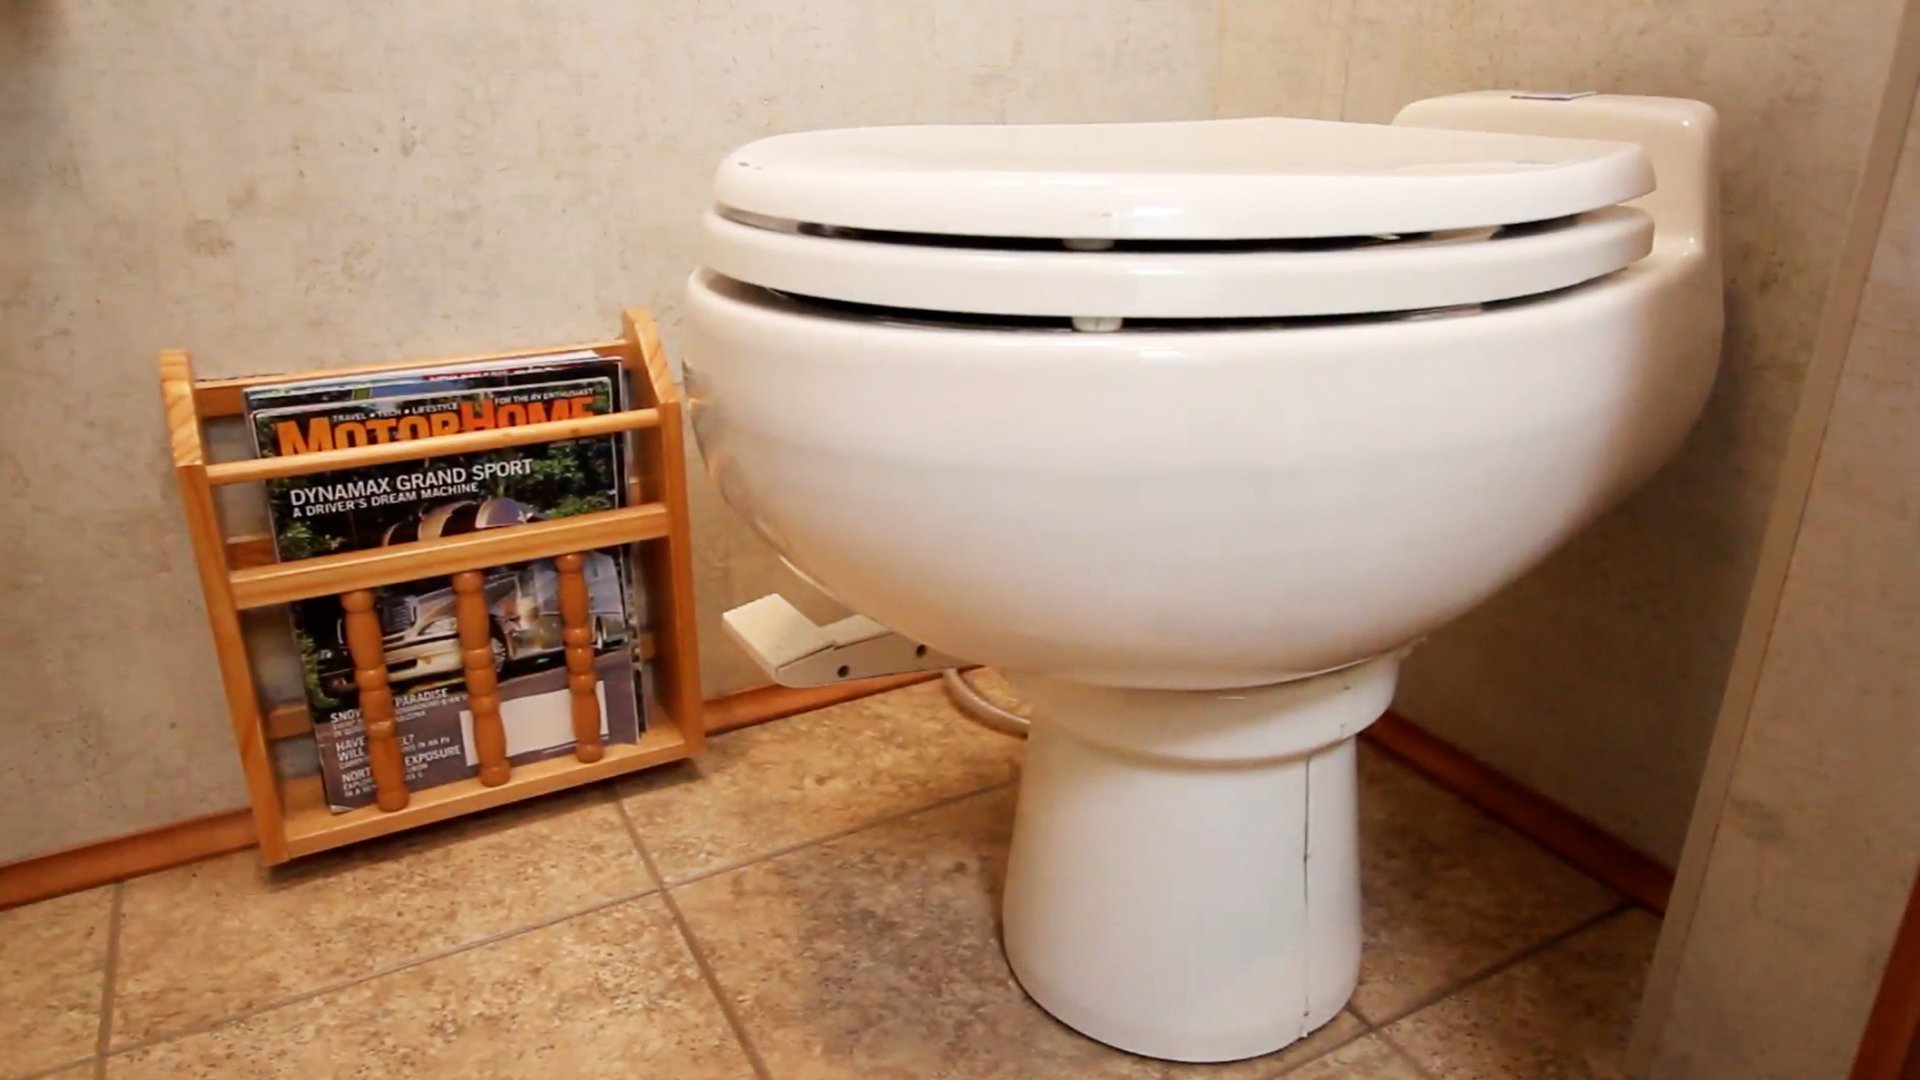 The RV “Toilet Talk”: How Does an RV Toilet Work?